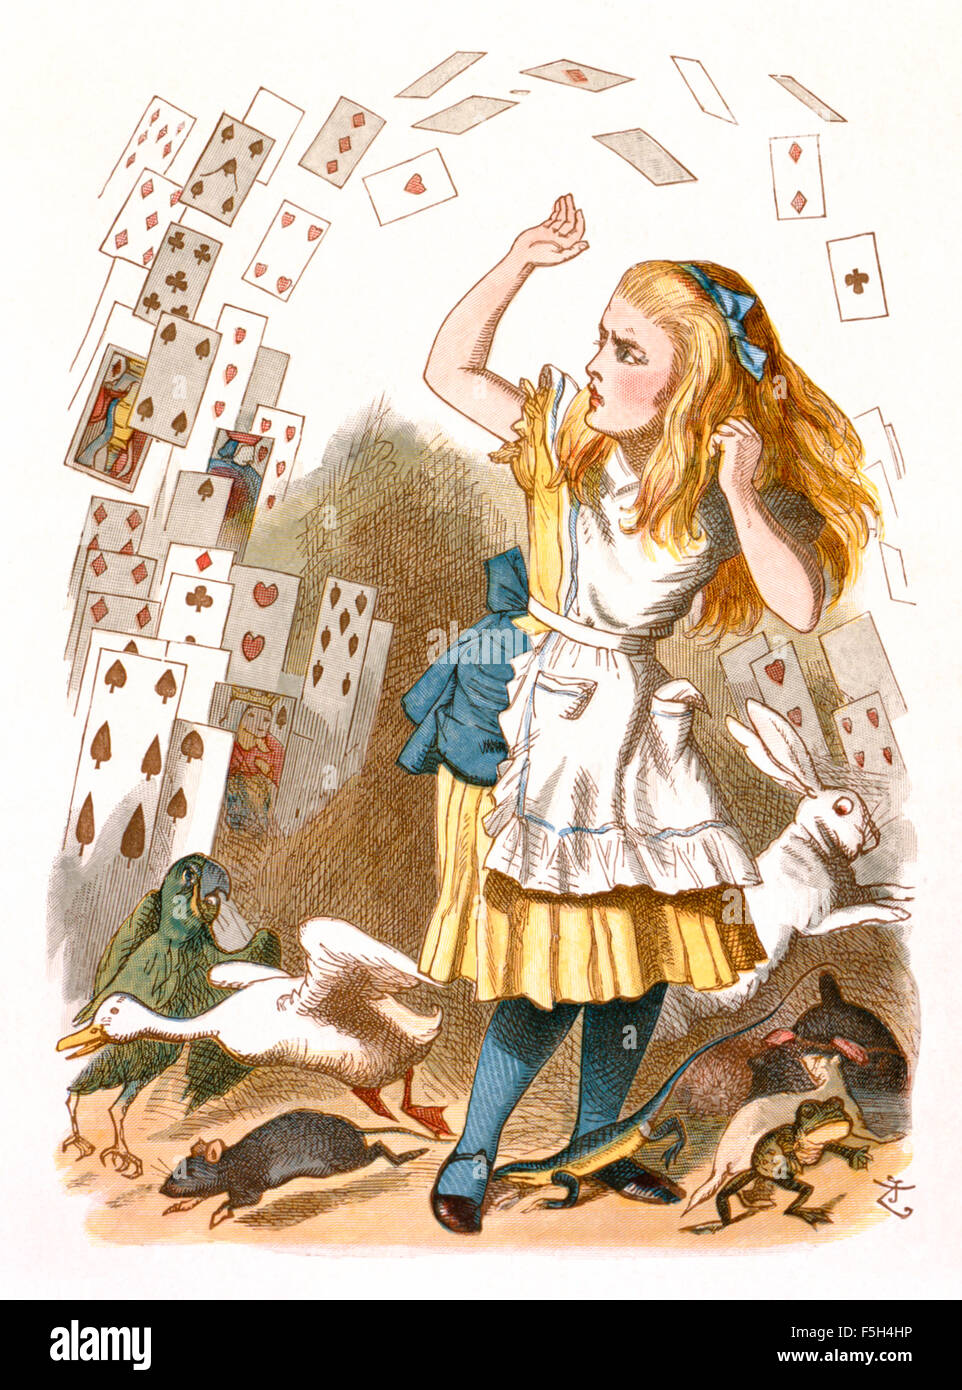 'The Shower of Cards' from 'The Nursery “Alice'', an shortened adaptation of ‘Alice’s Adventures in Wonderland’ aimed at under-fives written by Lewis Carroll (1832-1898) himself. This edition contains 20 selected illustrations by Sir John Tenniel (1820-1914) from the original book which were enlarged and coloured by Emily Gertrude Thomson (1850-1929). See description for more information. Stock Photo